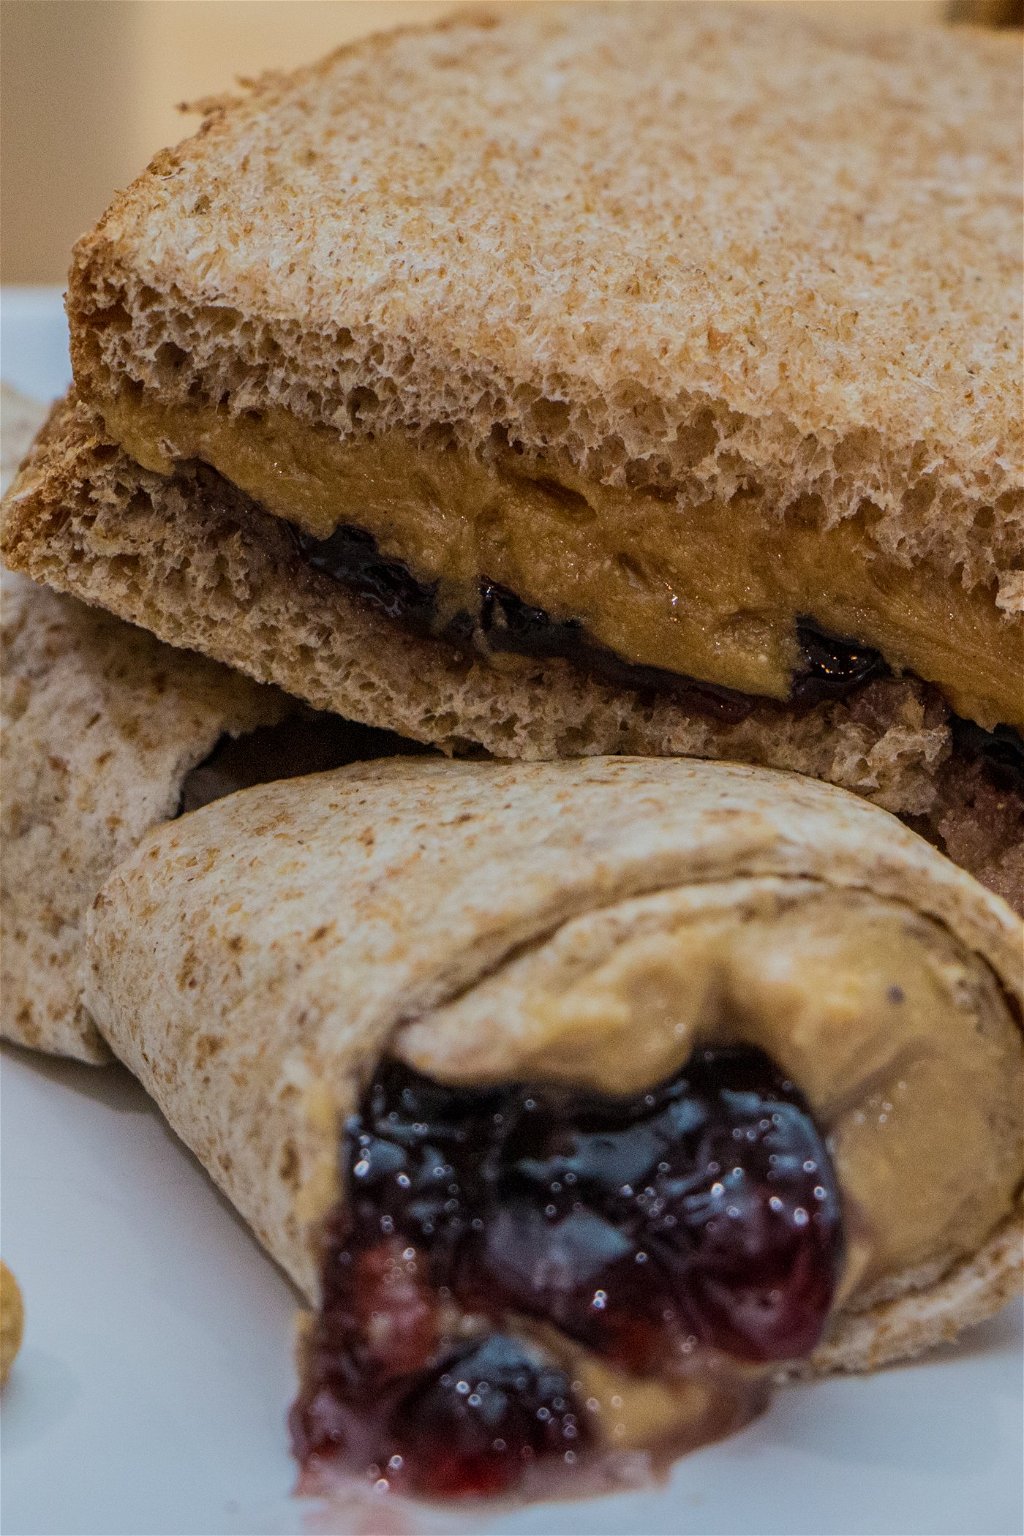 Protein Peanut Butter &amp; Jelly Sandwiches - The Protein Chef